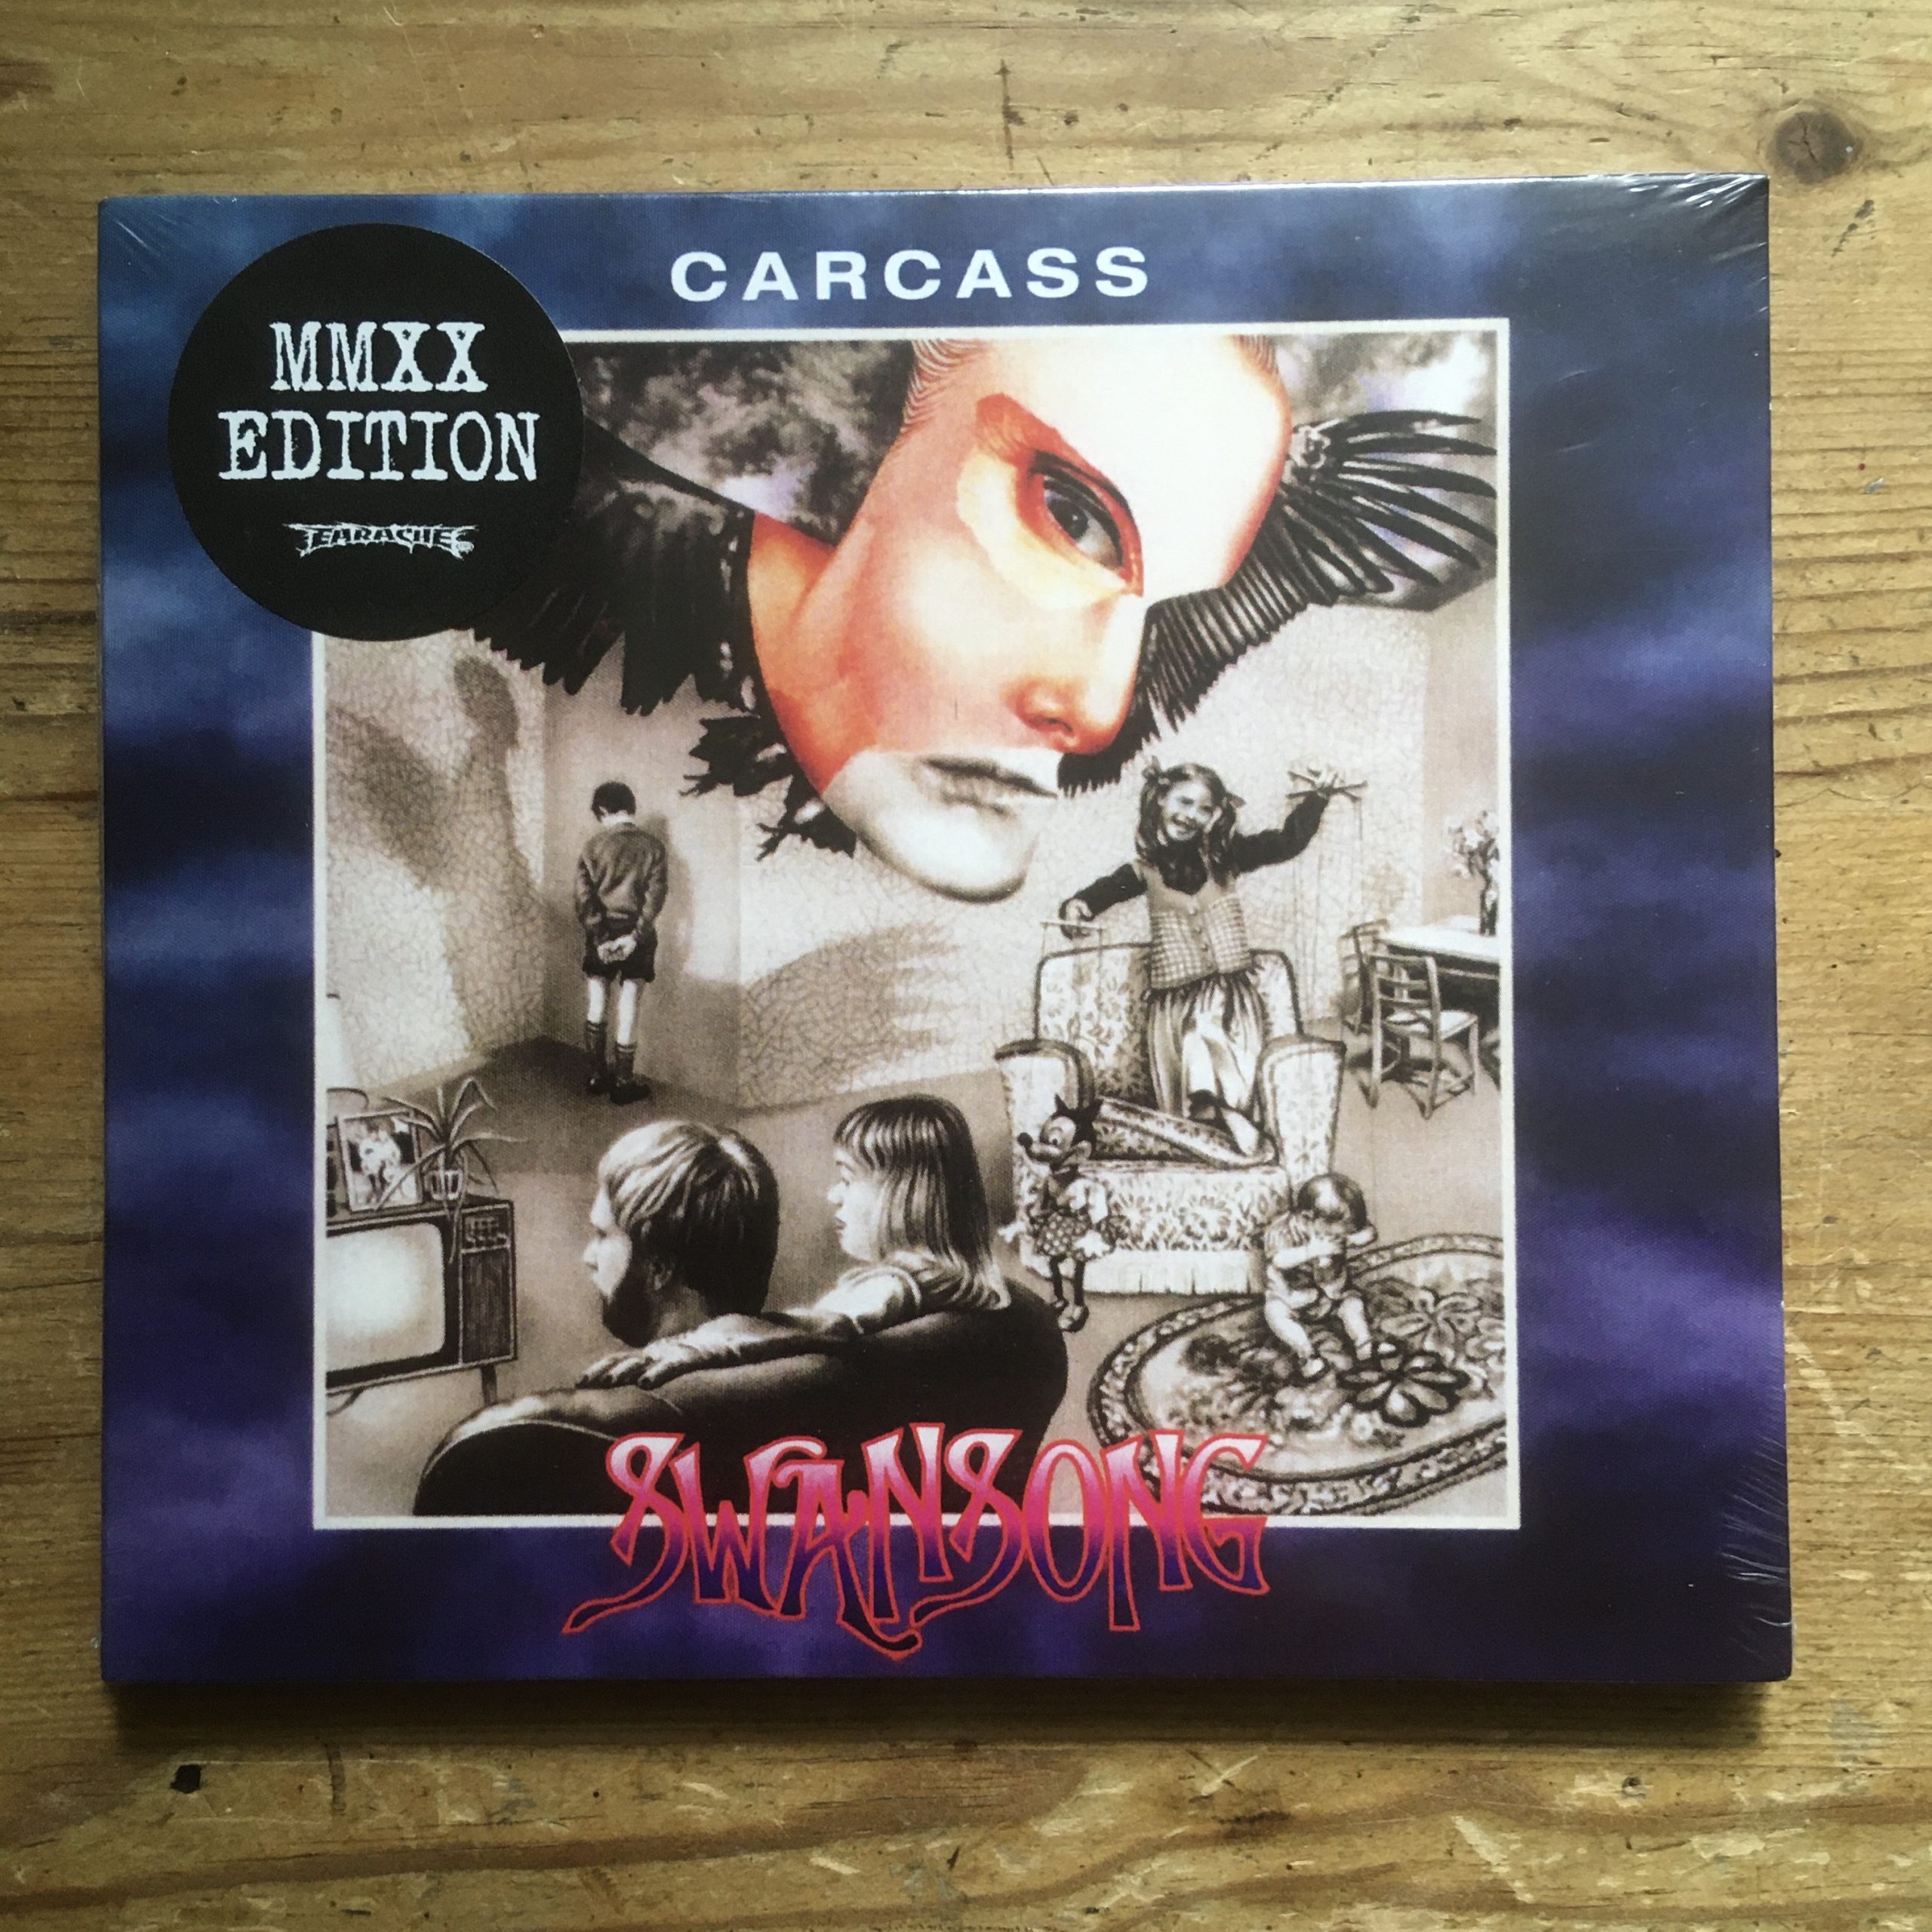 Photo of the Carcass - "Swansong" digipack CD